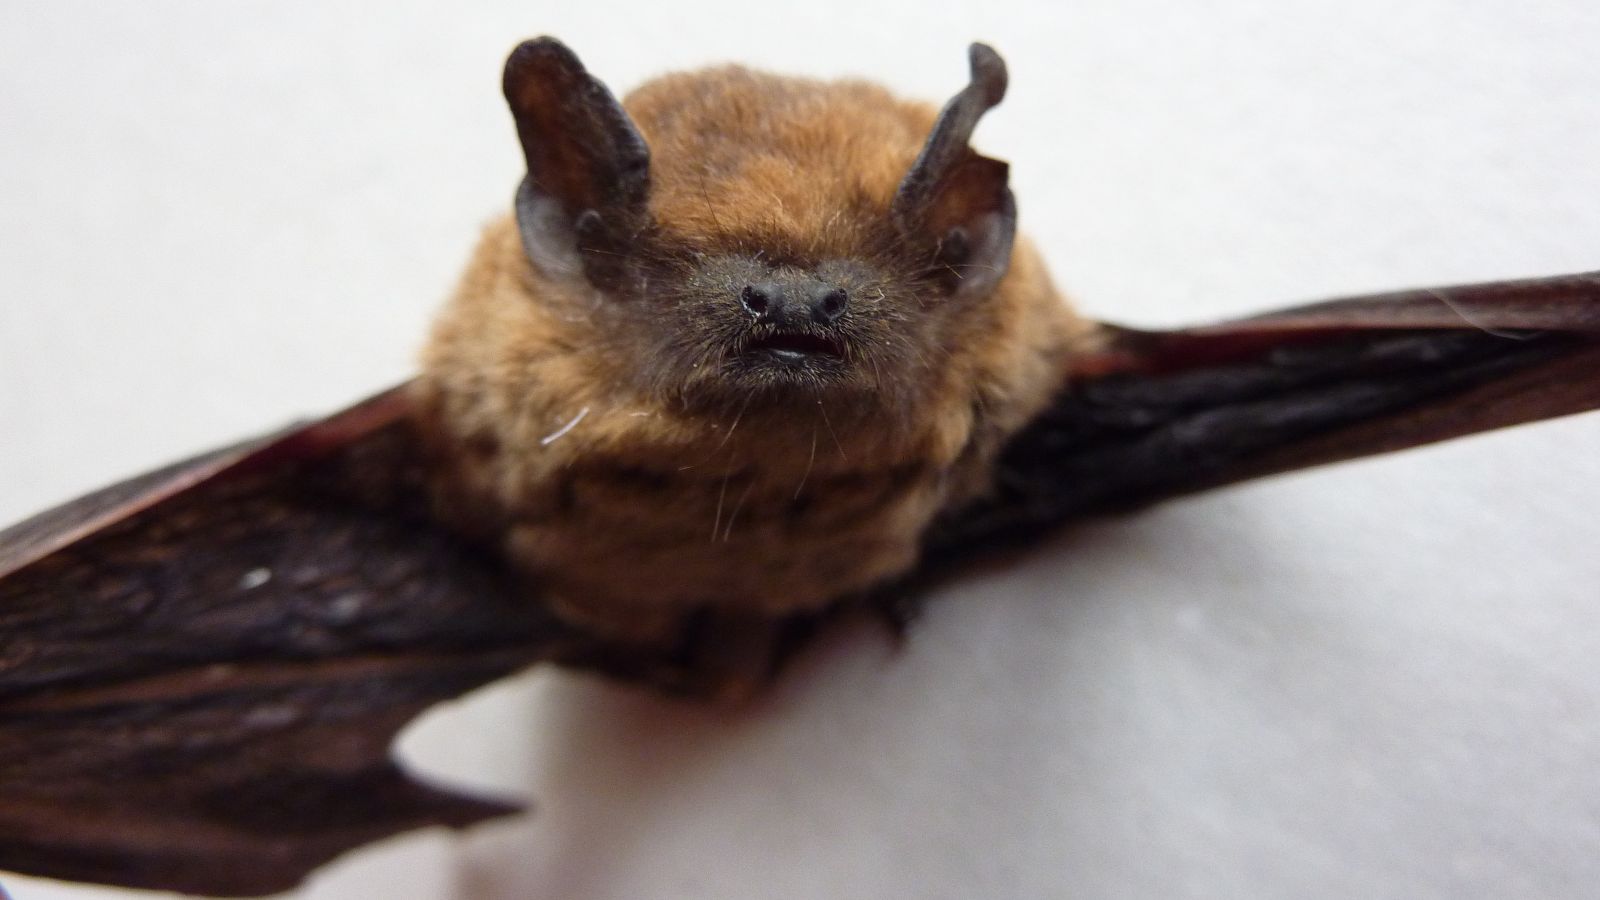 Bats can be used instead of harmful pesticides to protect crops. Photo by Salix/Wikimedia Commons/CC BY-SA 3.0